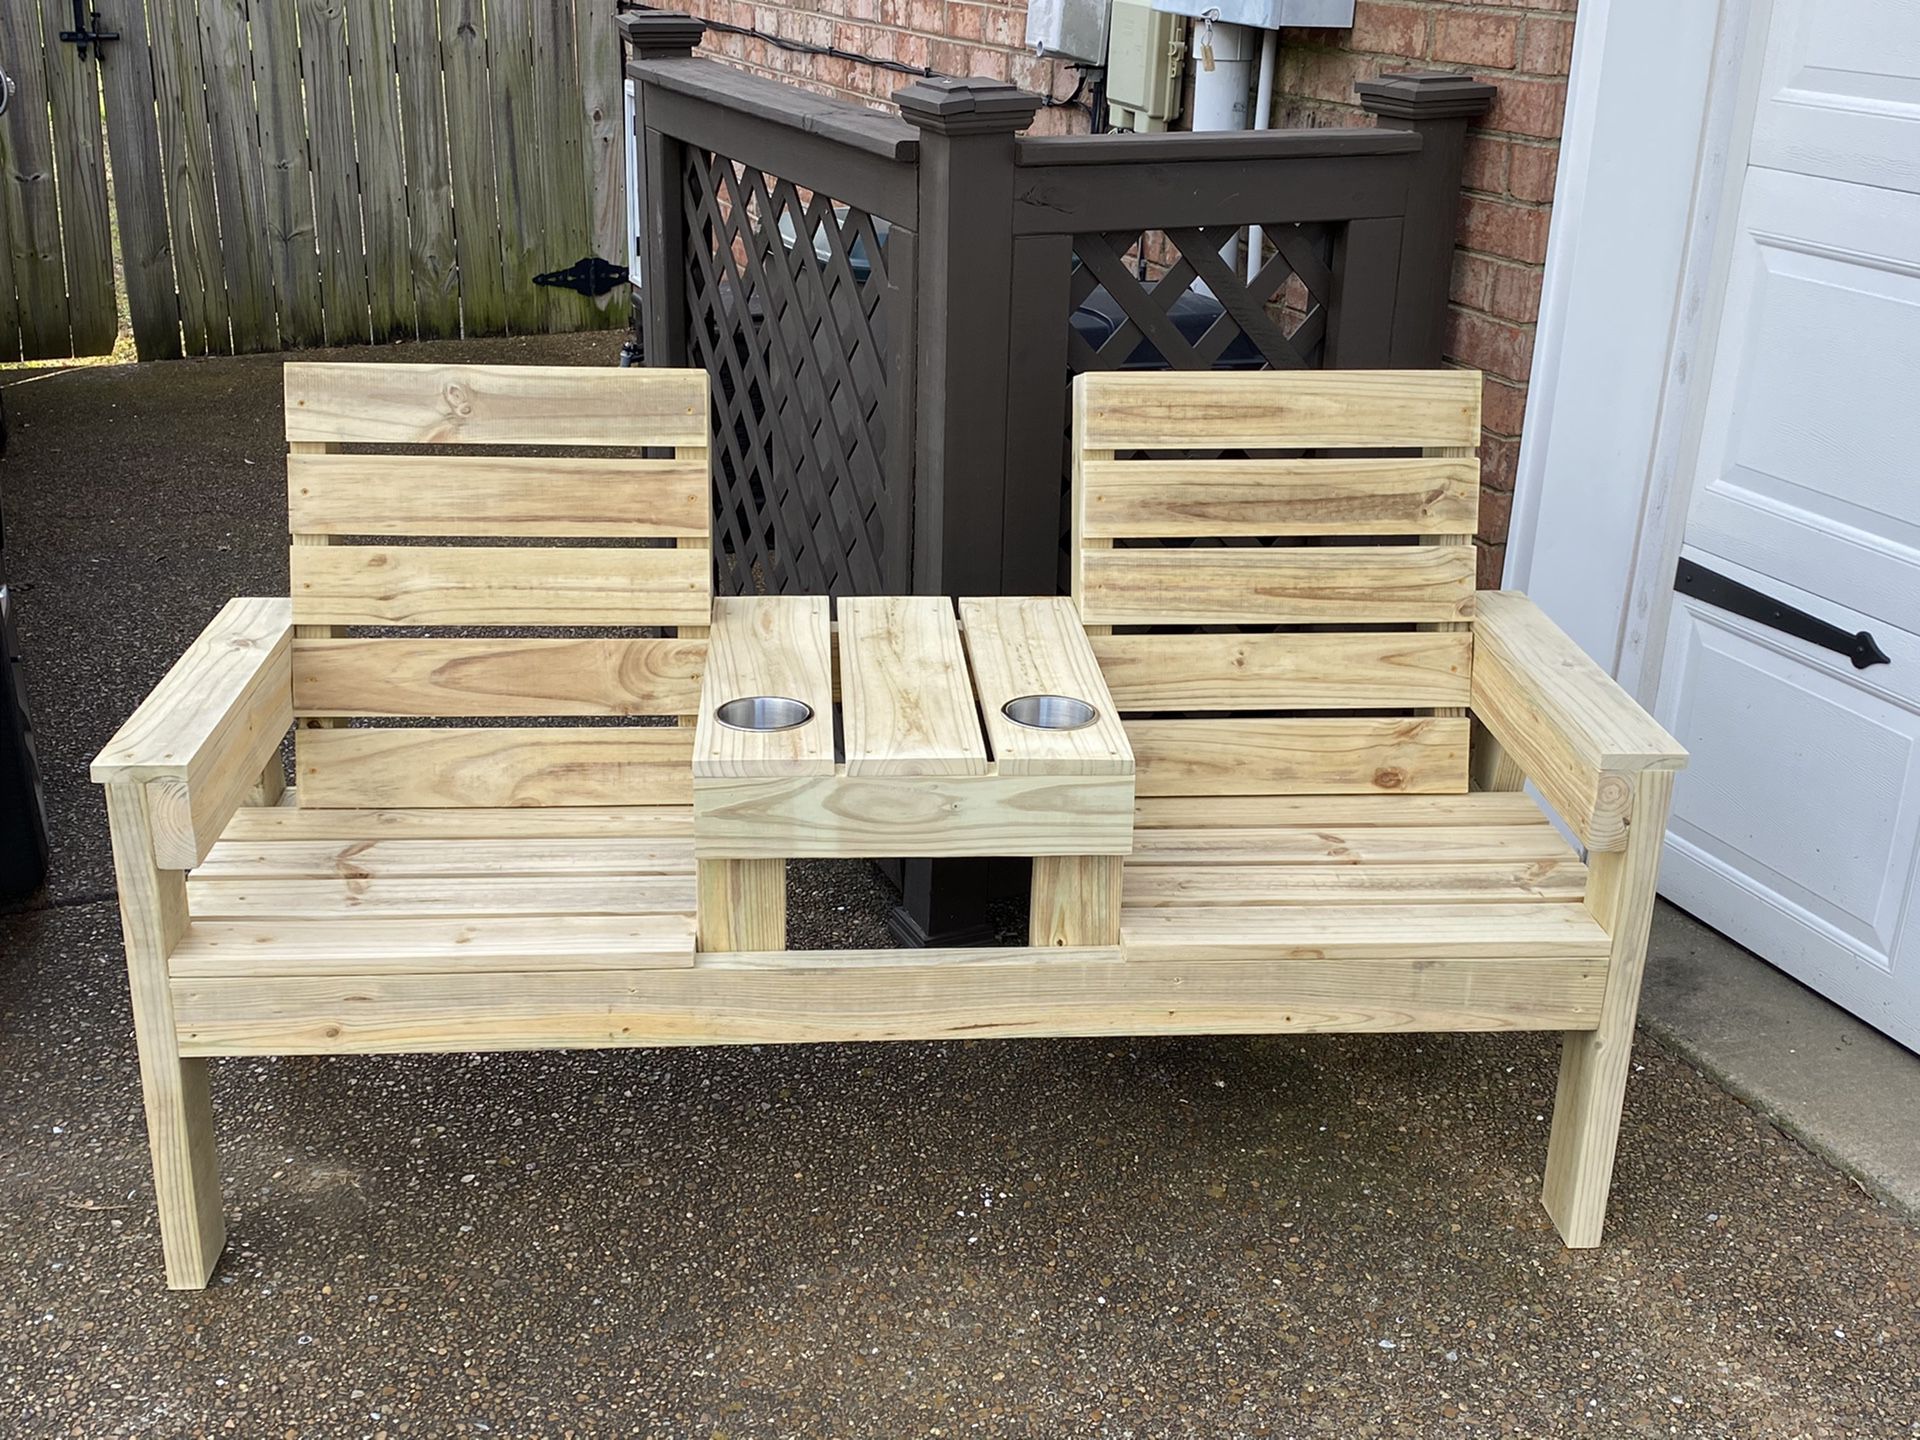 Double Seat Wood Bench with Stainless Steel Cup Holders